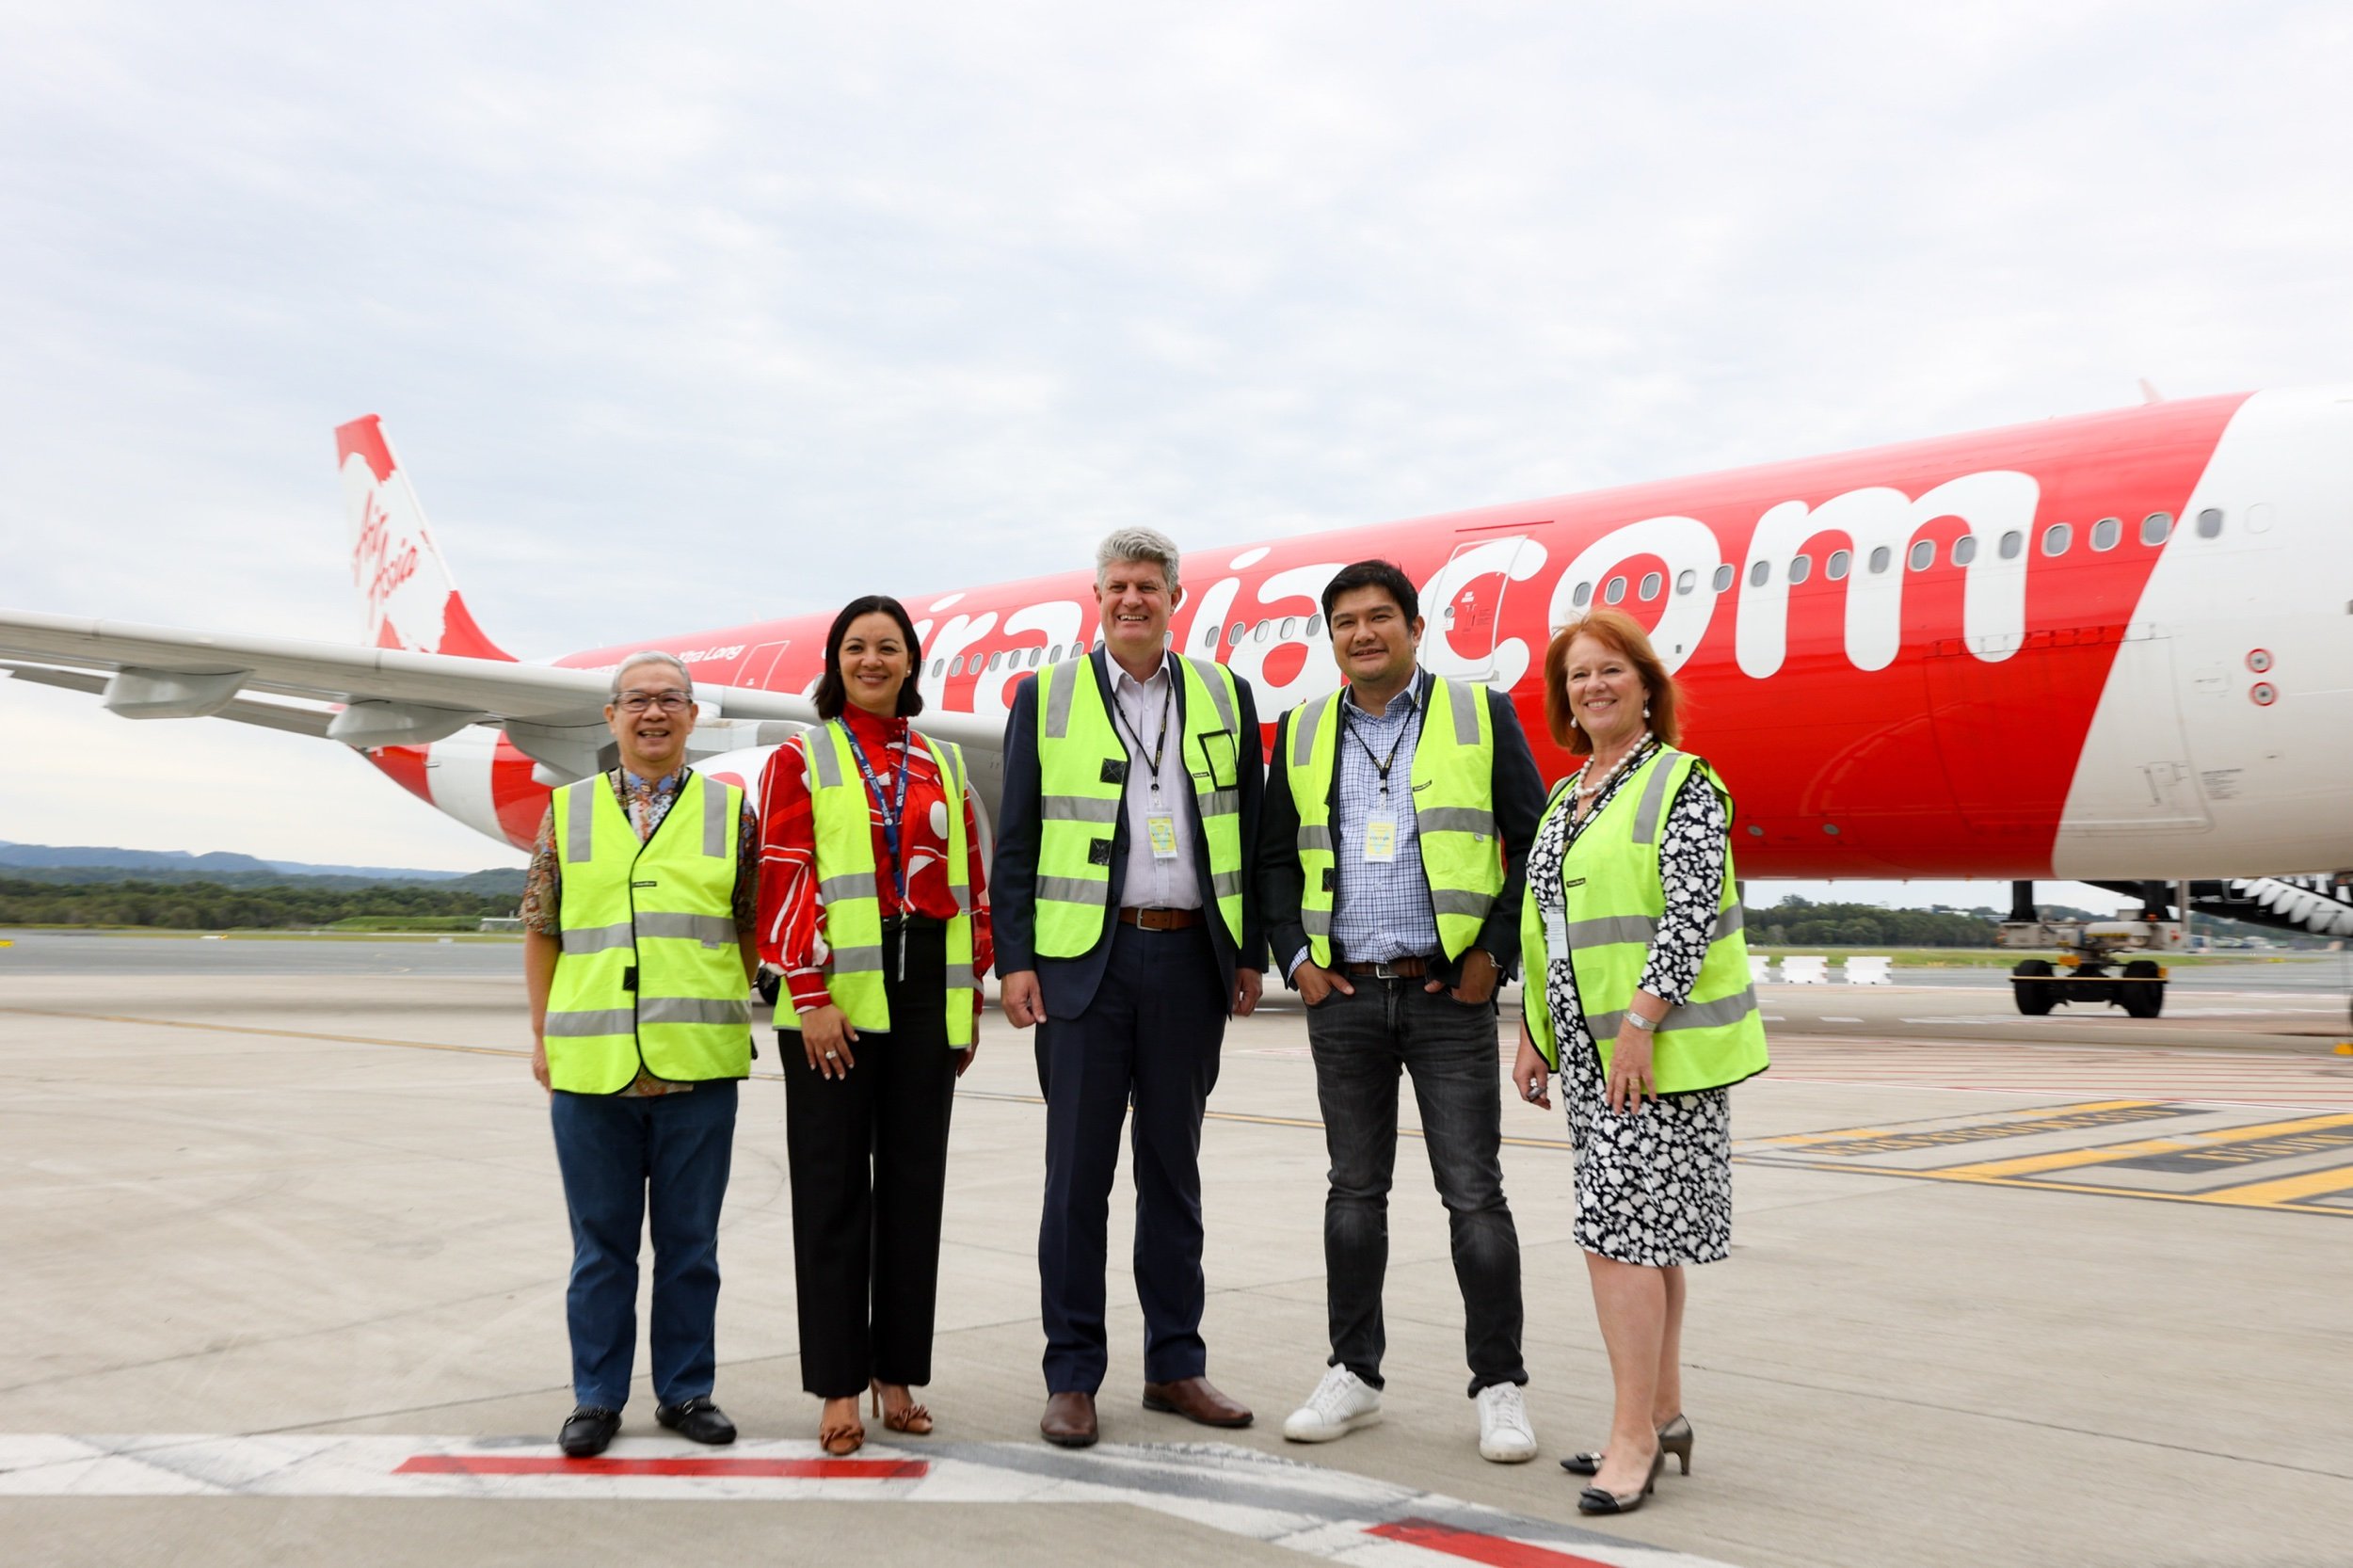  Photo Caption: (From left) Dato’ Fam Lee Ee, AirAsia X Board of Director; Amelia Evans, Queensland Airports Limited CEO;&nbsp; Stirling Hinchliffe, Queensland Minister for Tourism, Innovation and Sport; Benyamin Ismail, AirAsia X CEO; and Karen Boli